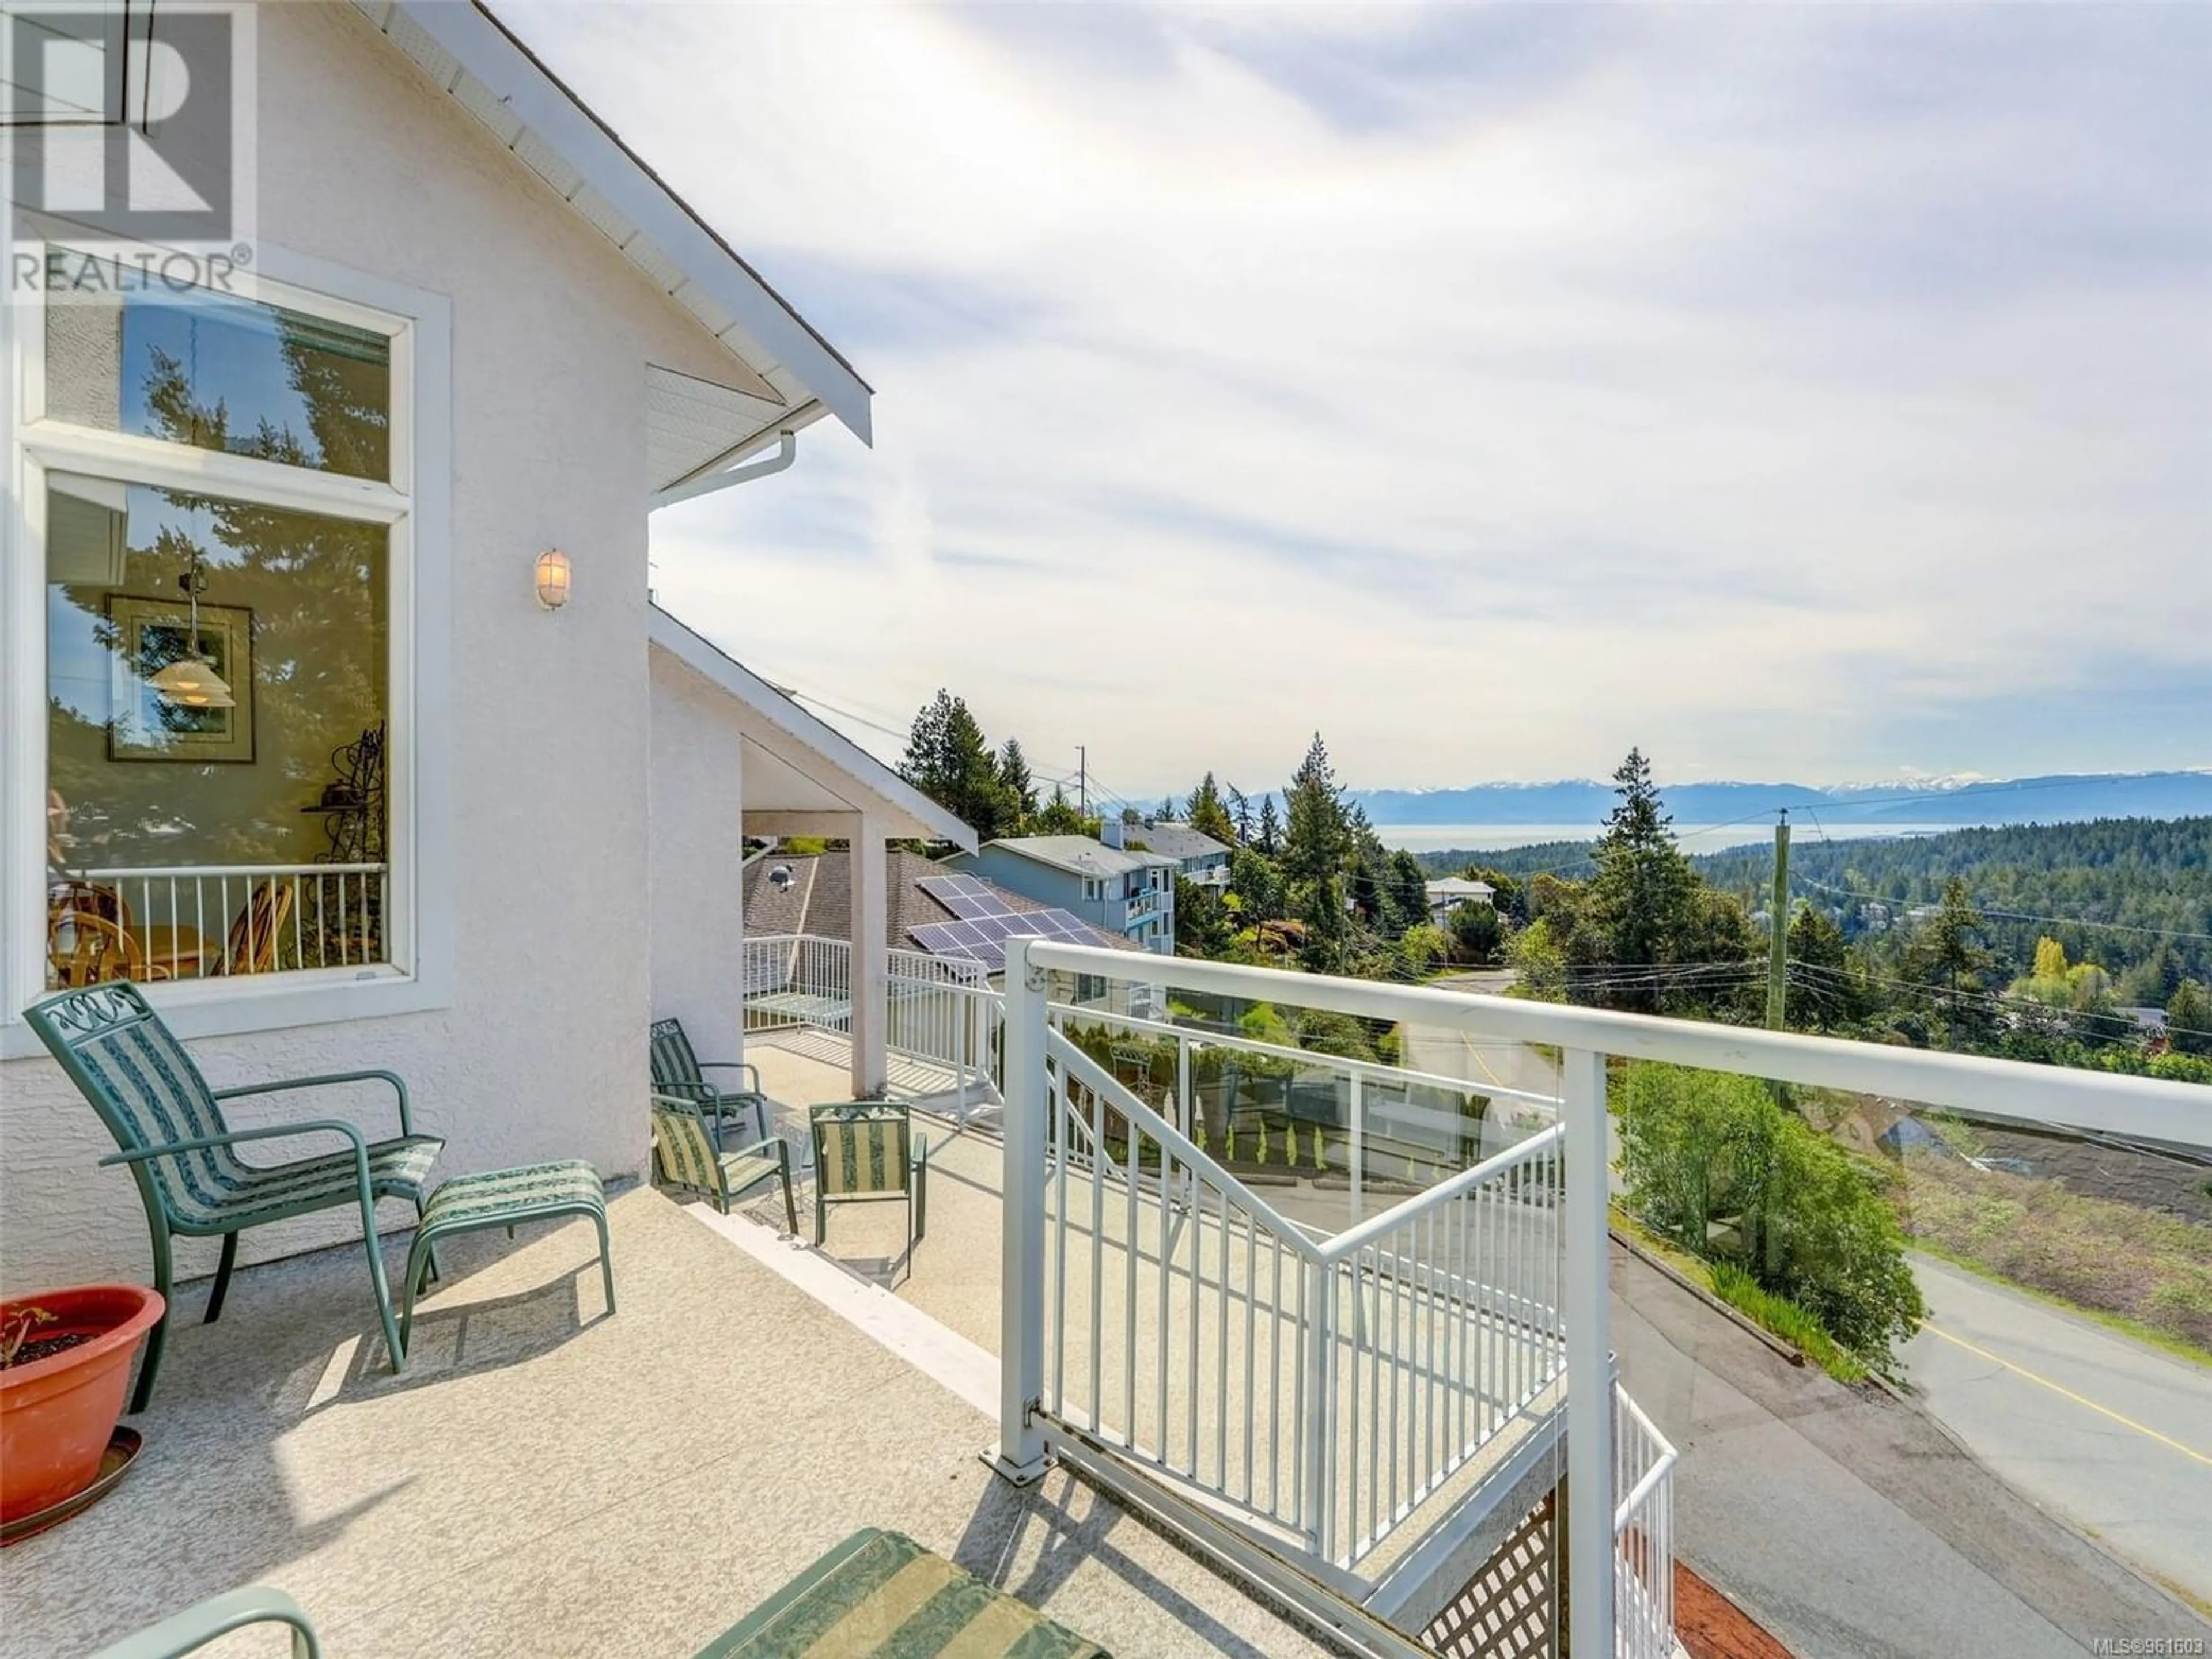 A pic from exterior of the house or condo for 3509 Sunheights Dr, Langford British Columbia V9C3T7